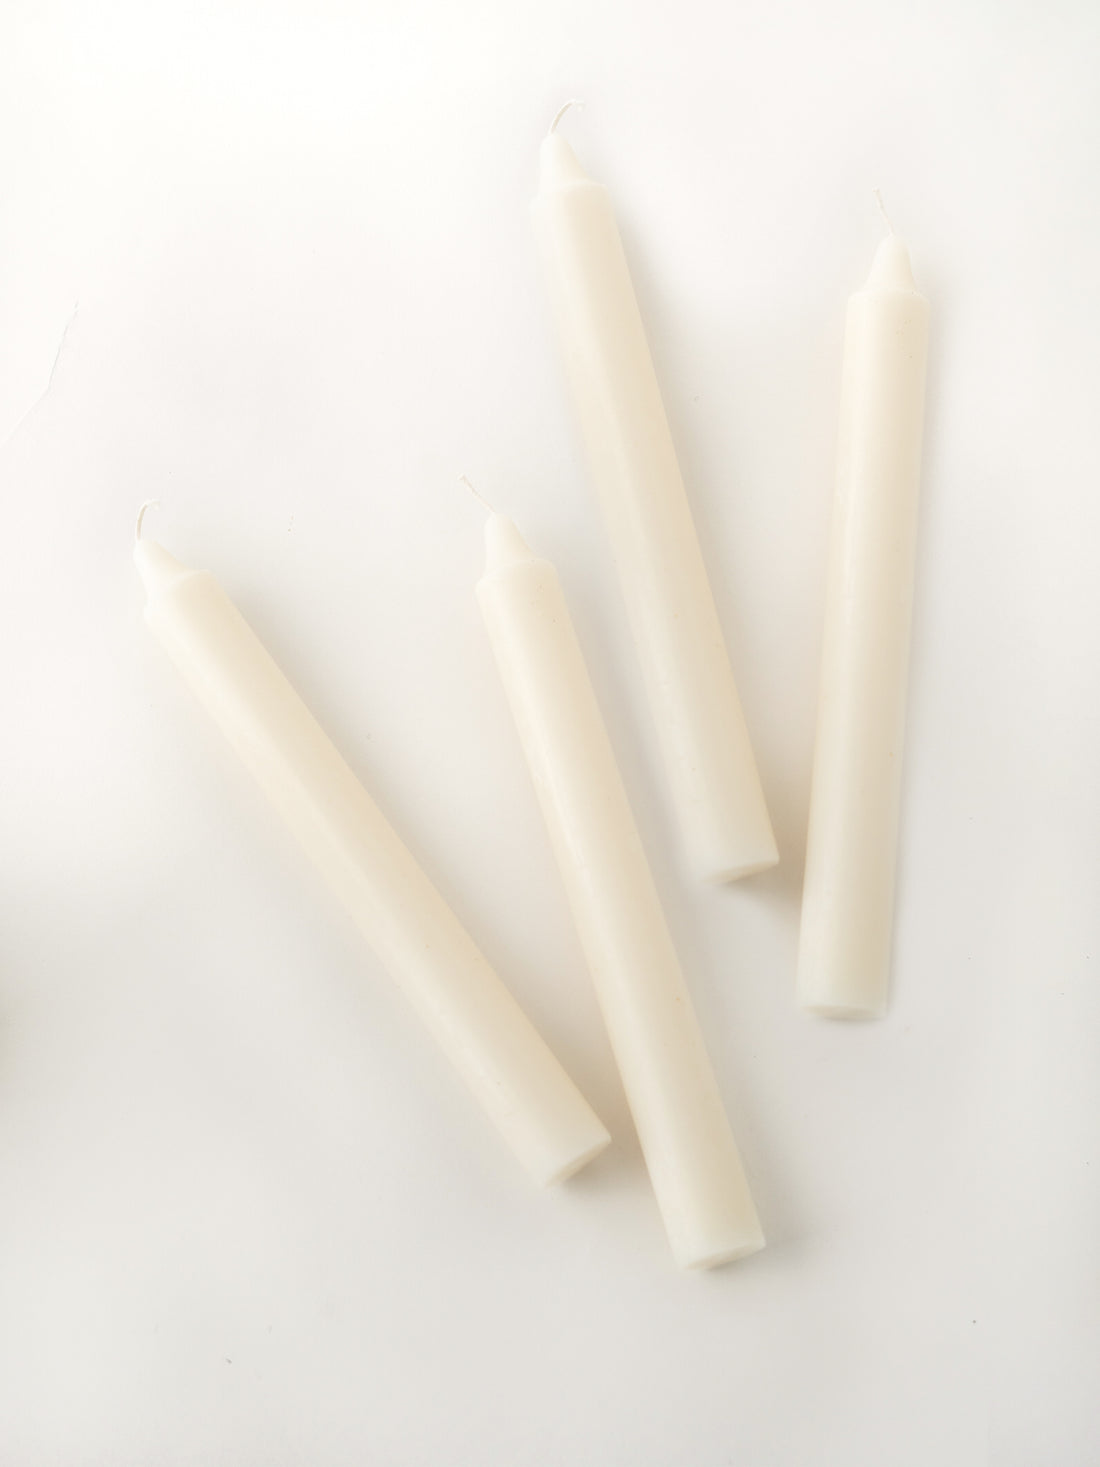 Thick Dinner Candles, Set of 4